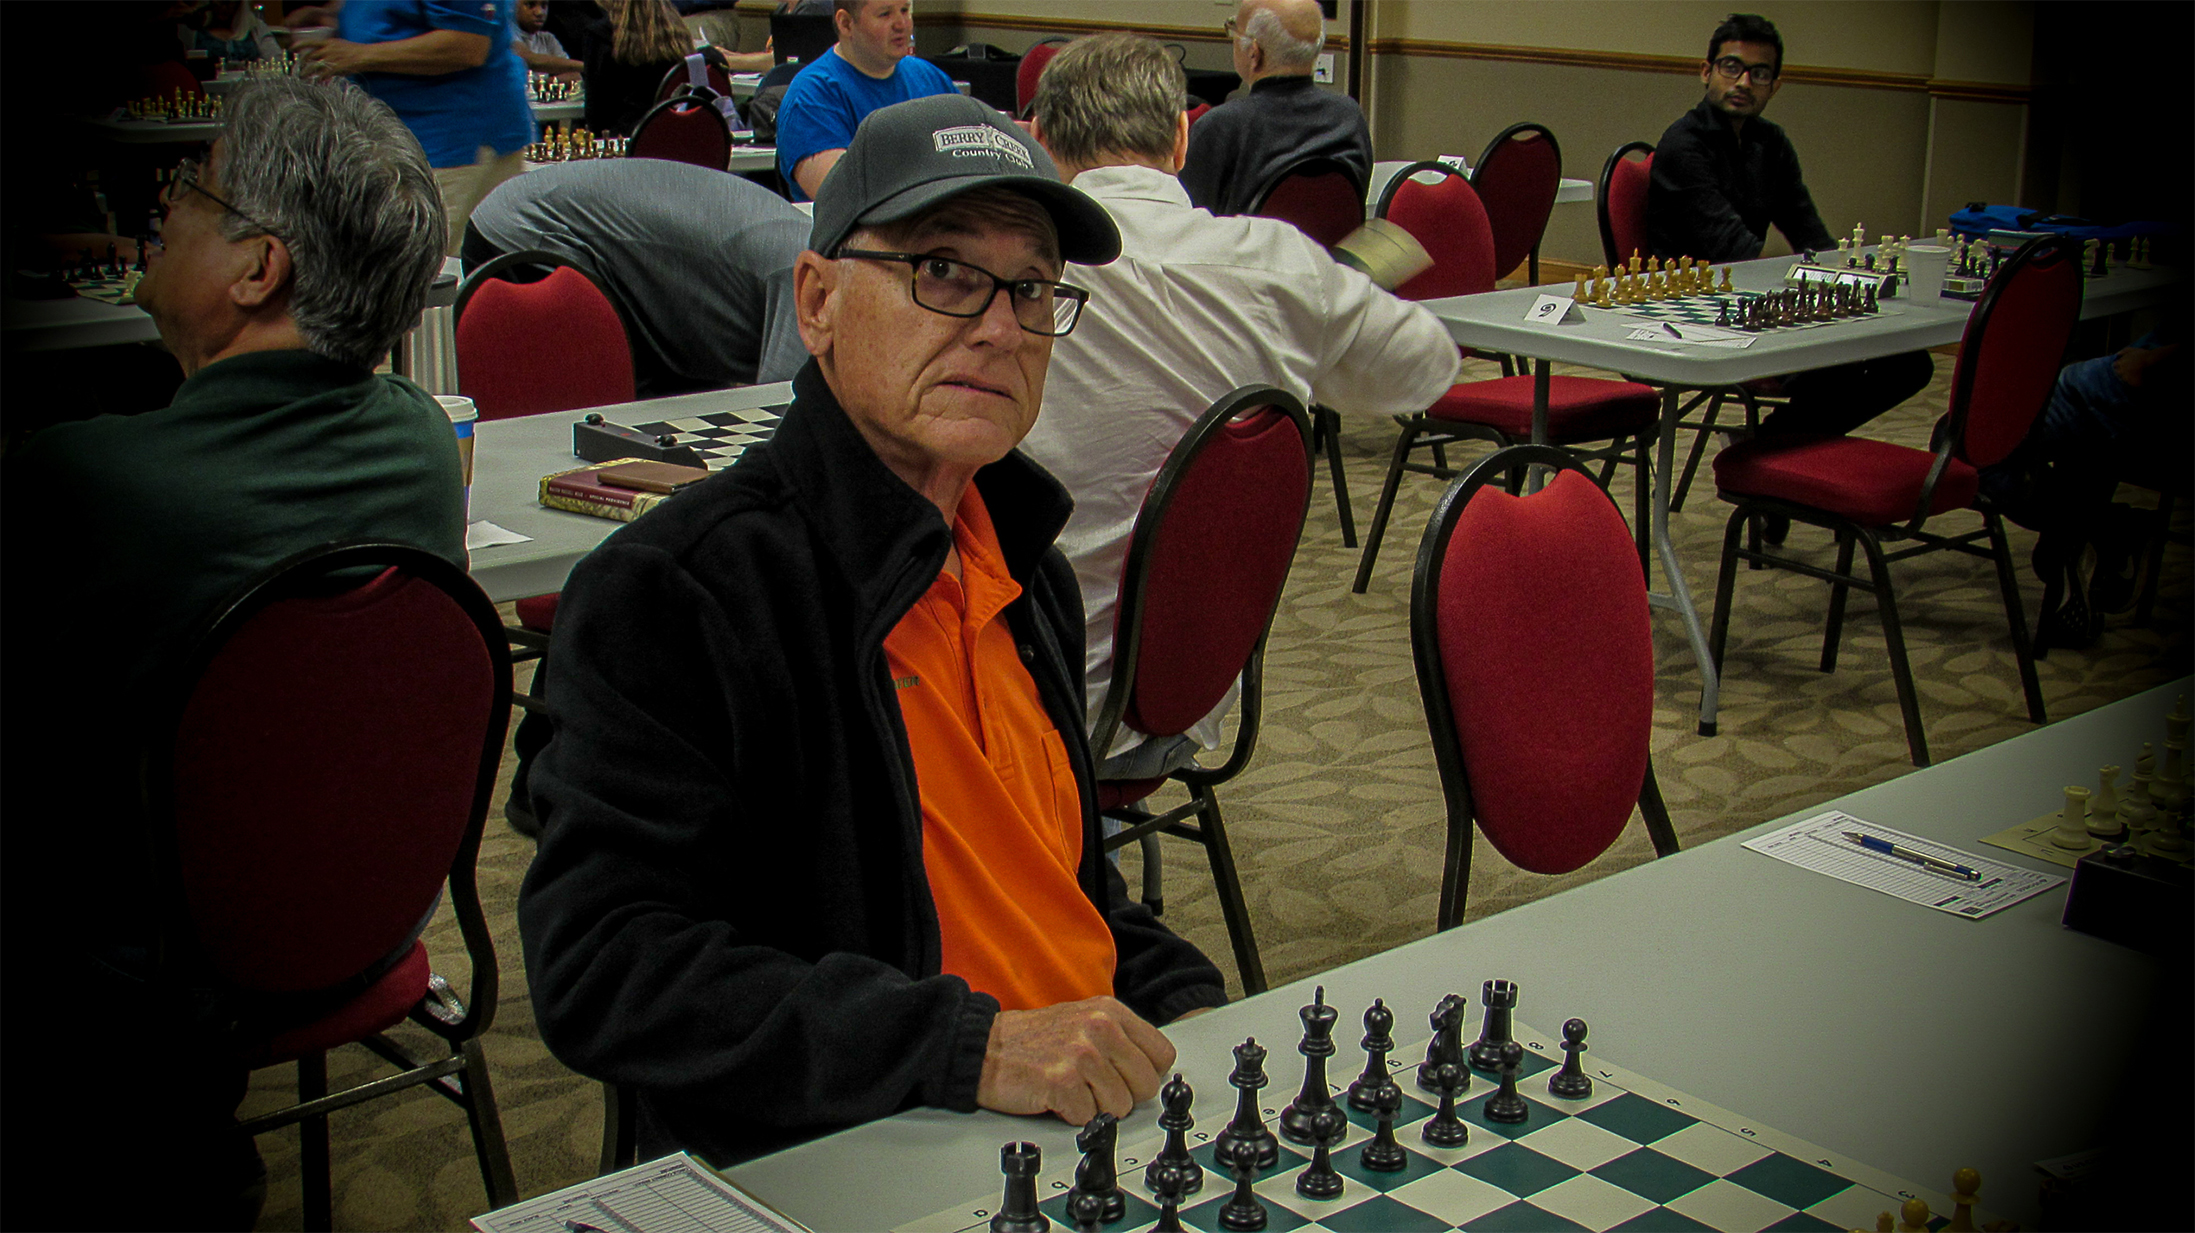 Chess Expert Jim Berry is a US Chess Life Member, US Chess Senior Tournament Director, FIDE Arbiter and International Organizer, and Oklahoma Chess Foundation President since 2003.  In the past he served, at his own expense, as a US Chess Executive Board member, US Chess Vice President (2009-2010), and US Chess President (2010-2011).  This was his 12th RRSO.  Photo by Mike Tubbs.